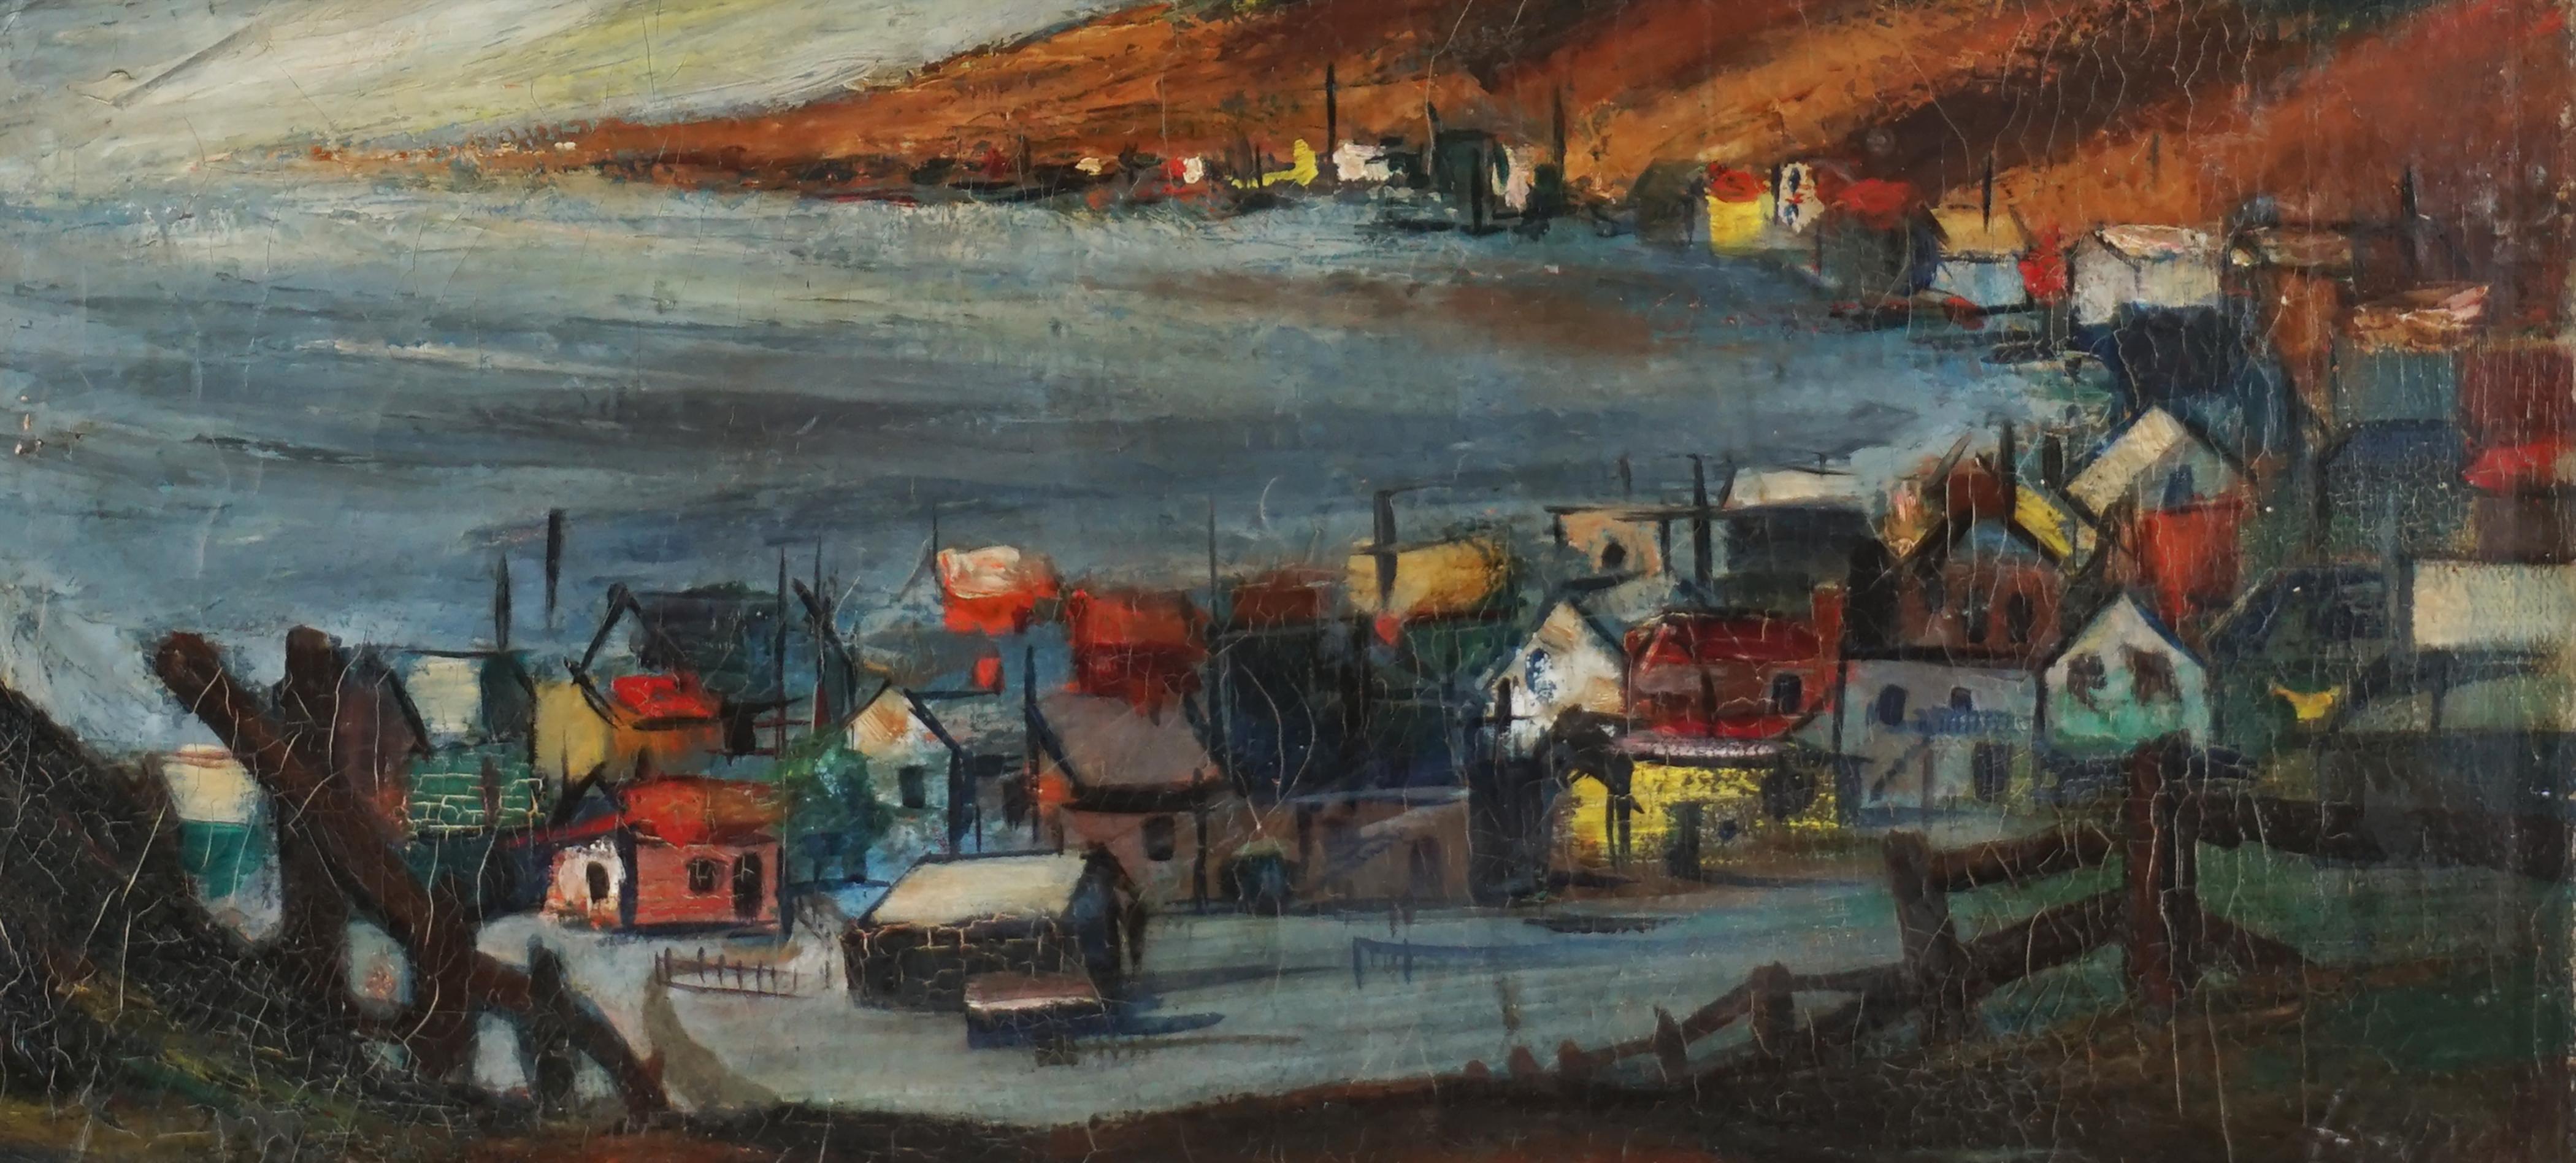 China Camp Fishing Village - San Rafael California - Abstract Impressionist
Wonderfully vivid nocturnal of coastal town by Roger Holt (American 1905-1979). Signed faintly lower right (see enhanced image of signature). Condition: good; professionally